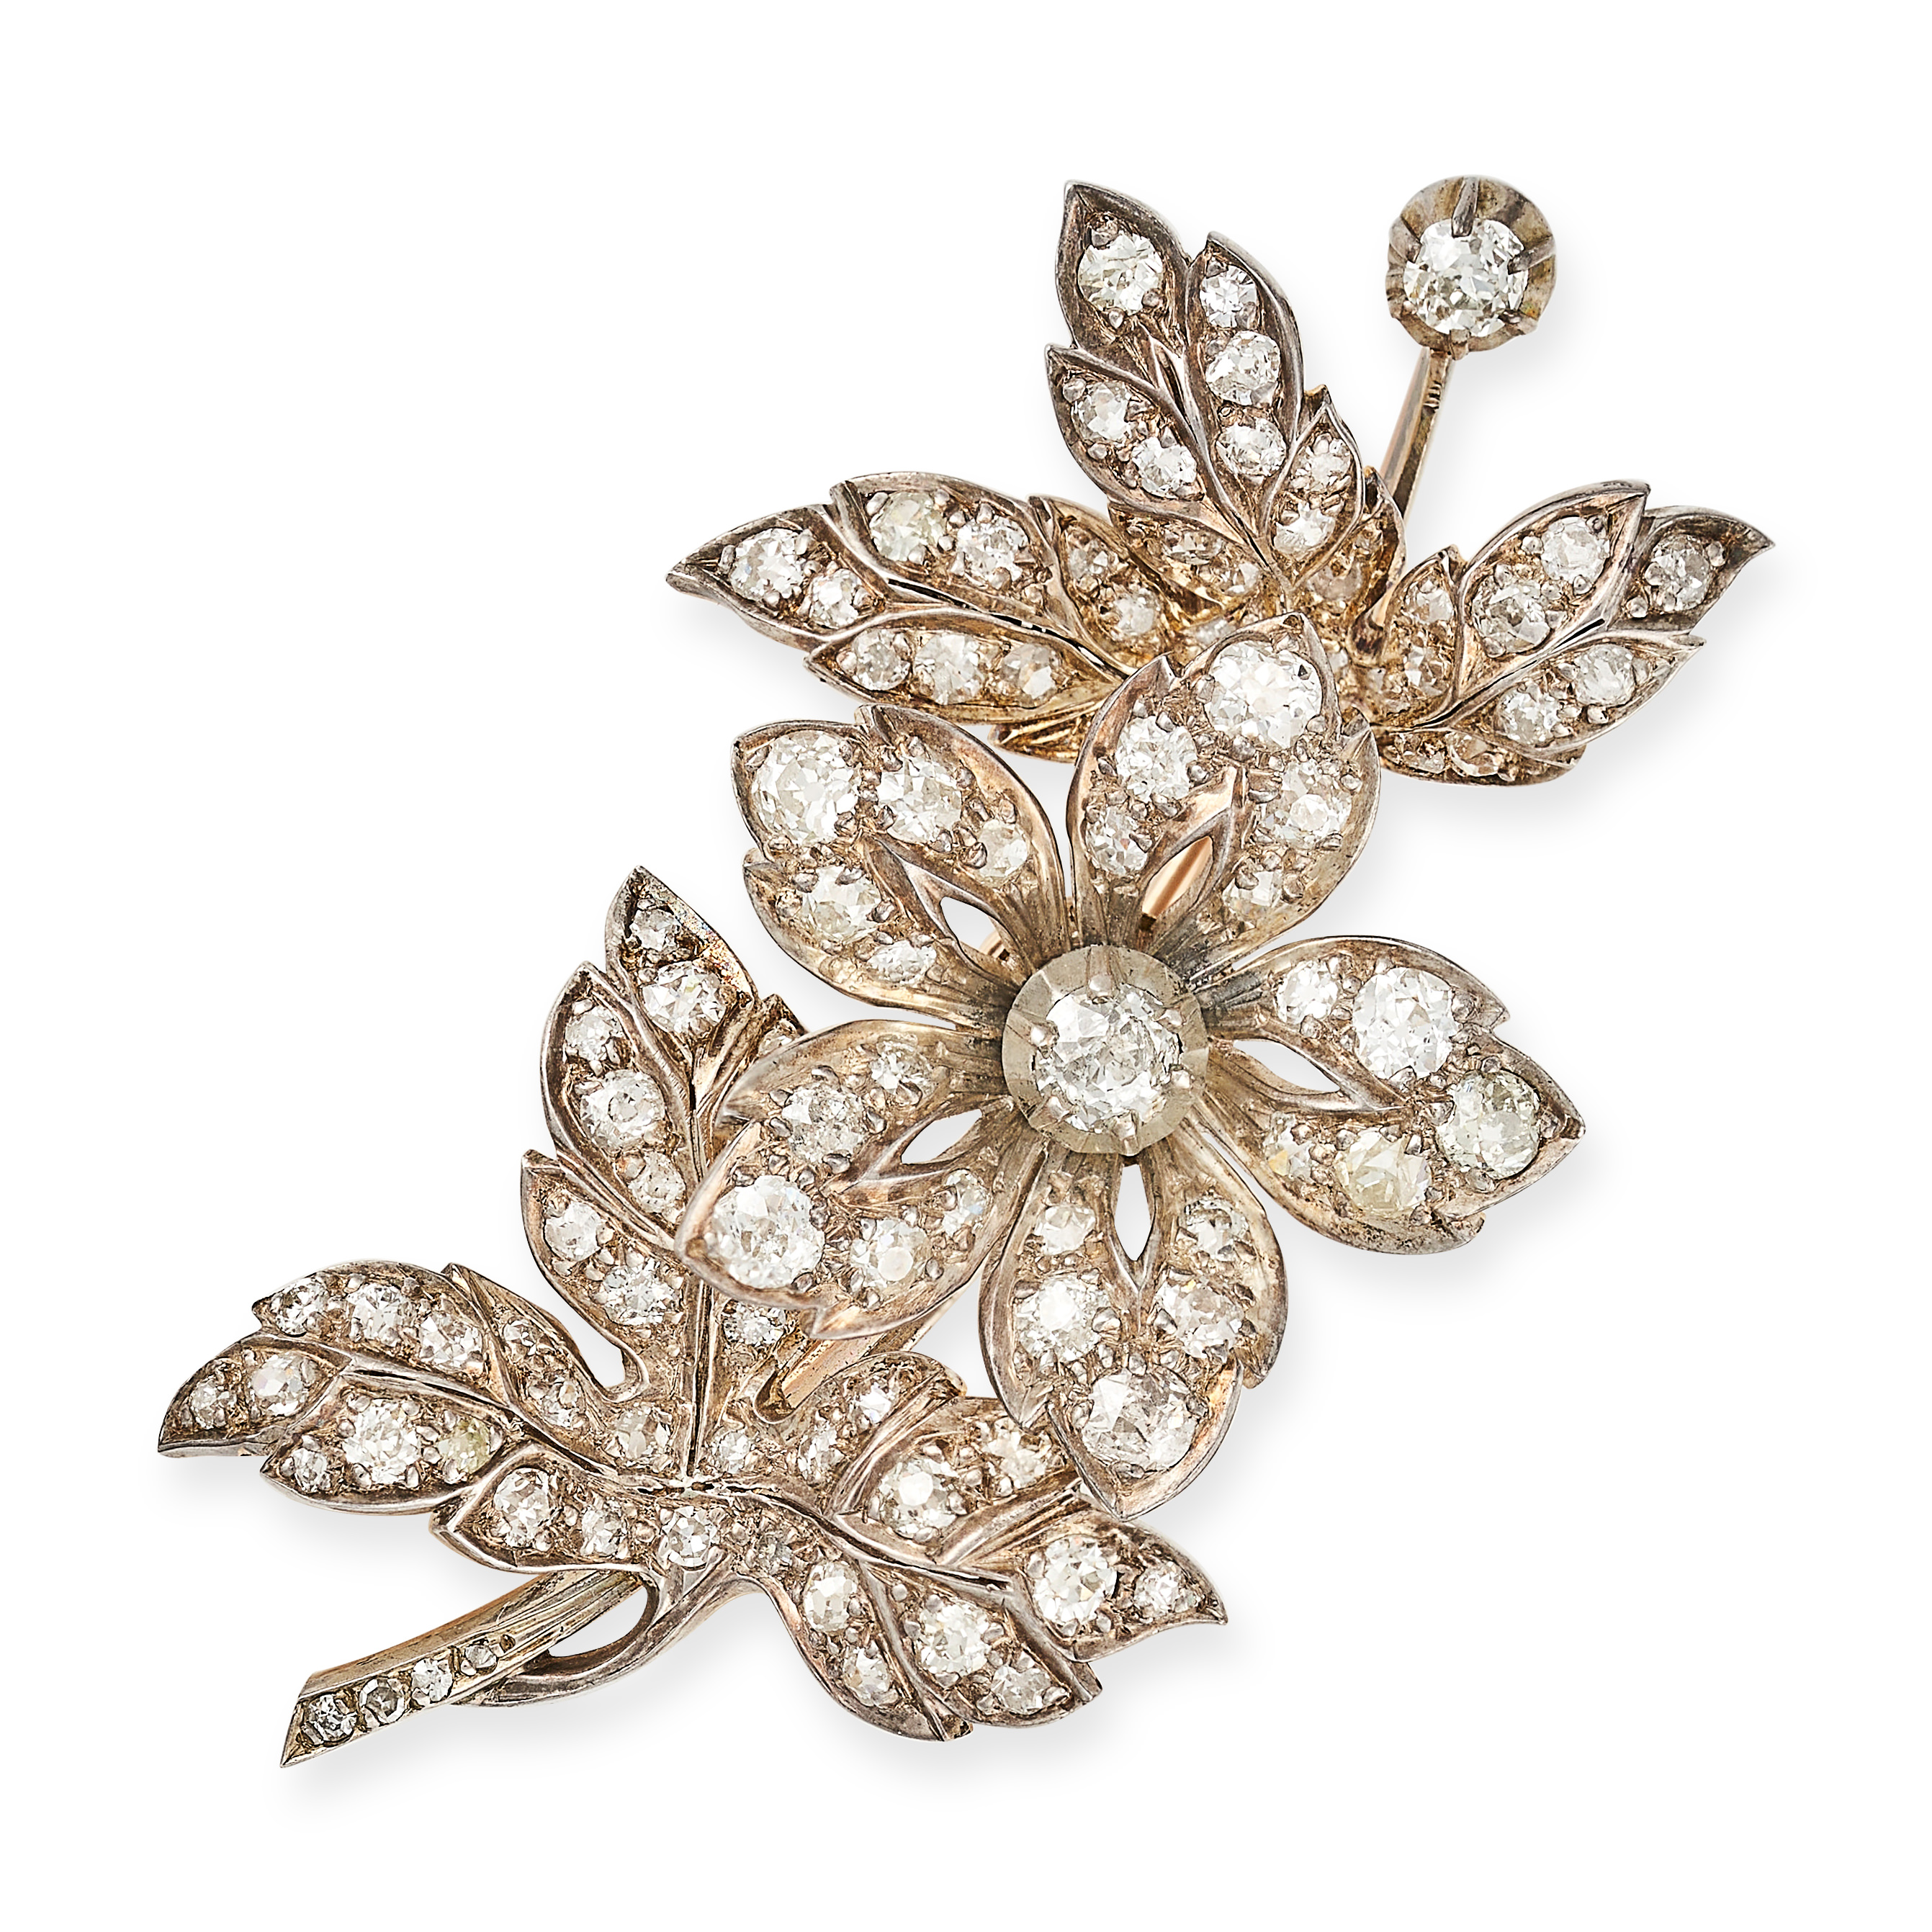 AN ANTIQUE DIAMOND FLOWER BROOCH in yellow gold and silver, set with old cut and single cut diamo...